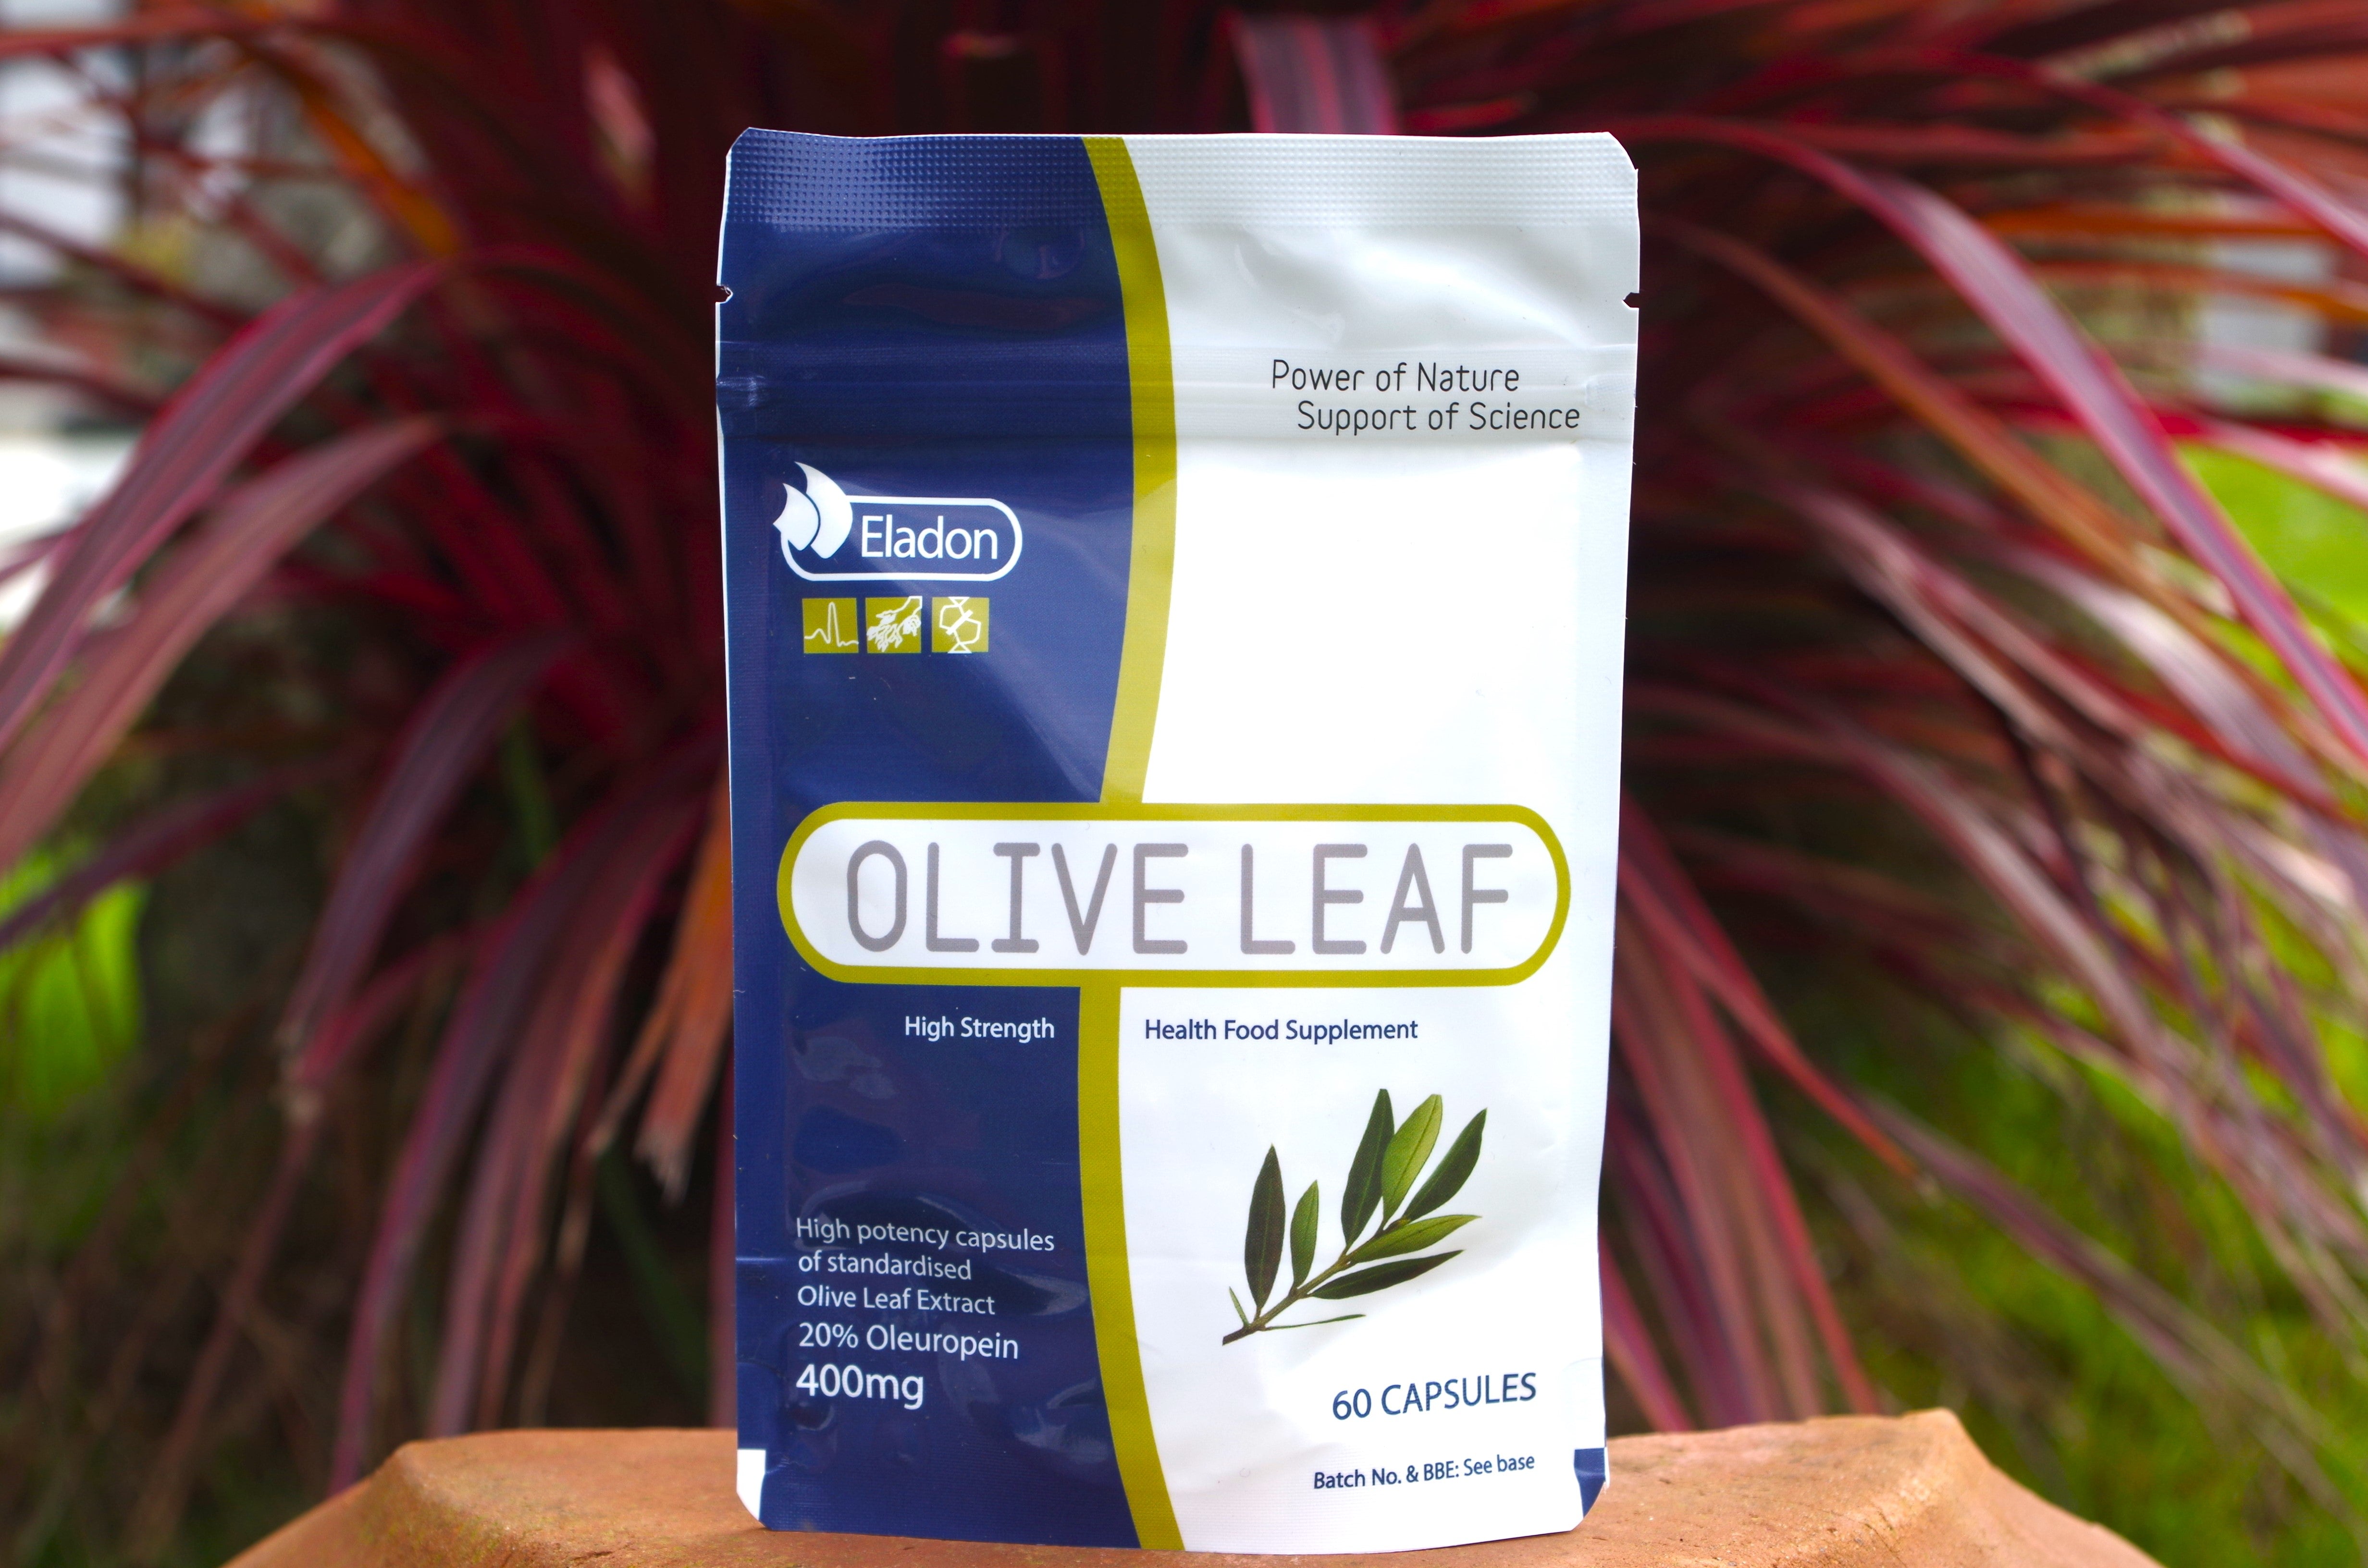 Why do our customers take Olive Leaf Extract?